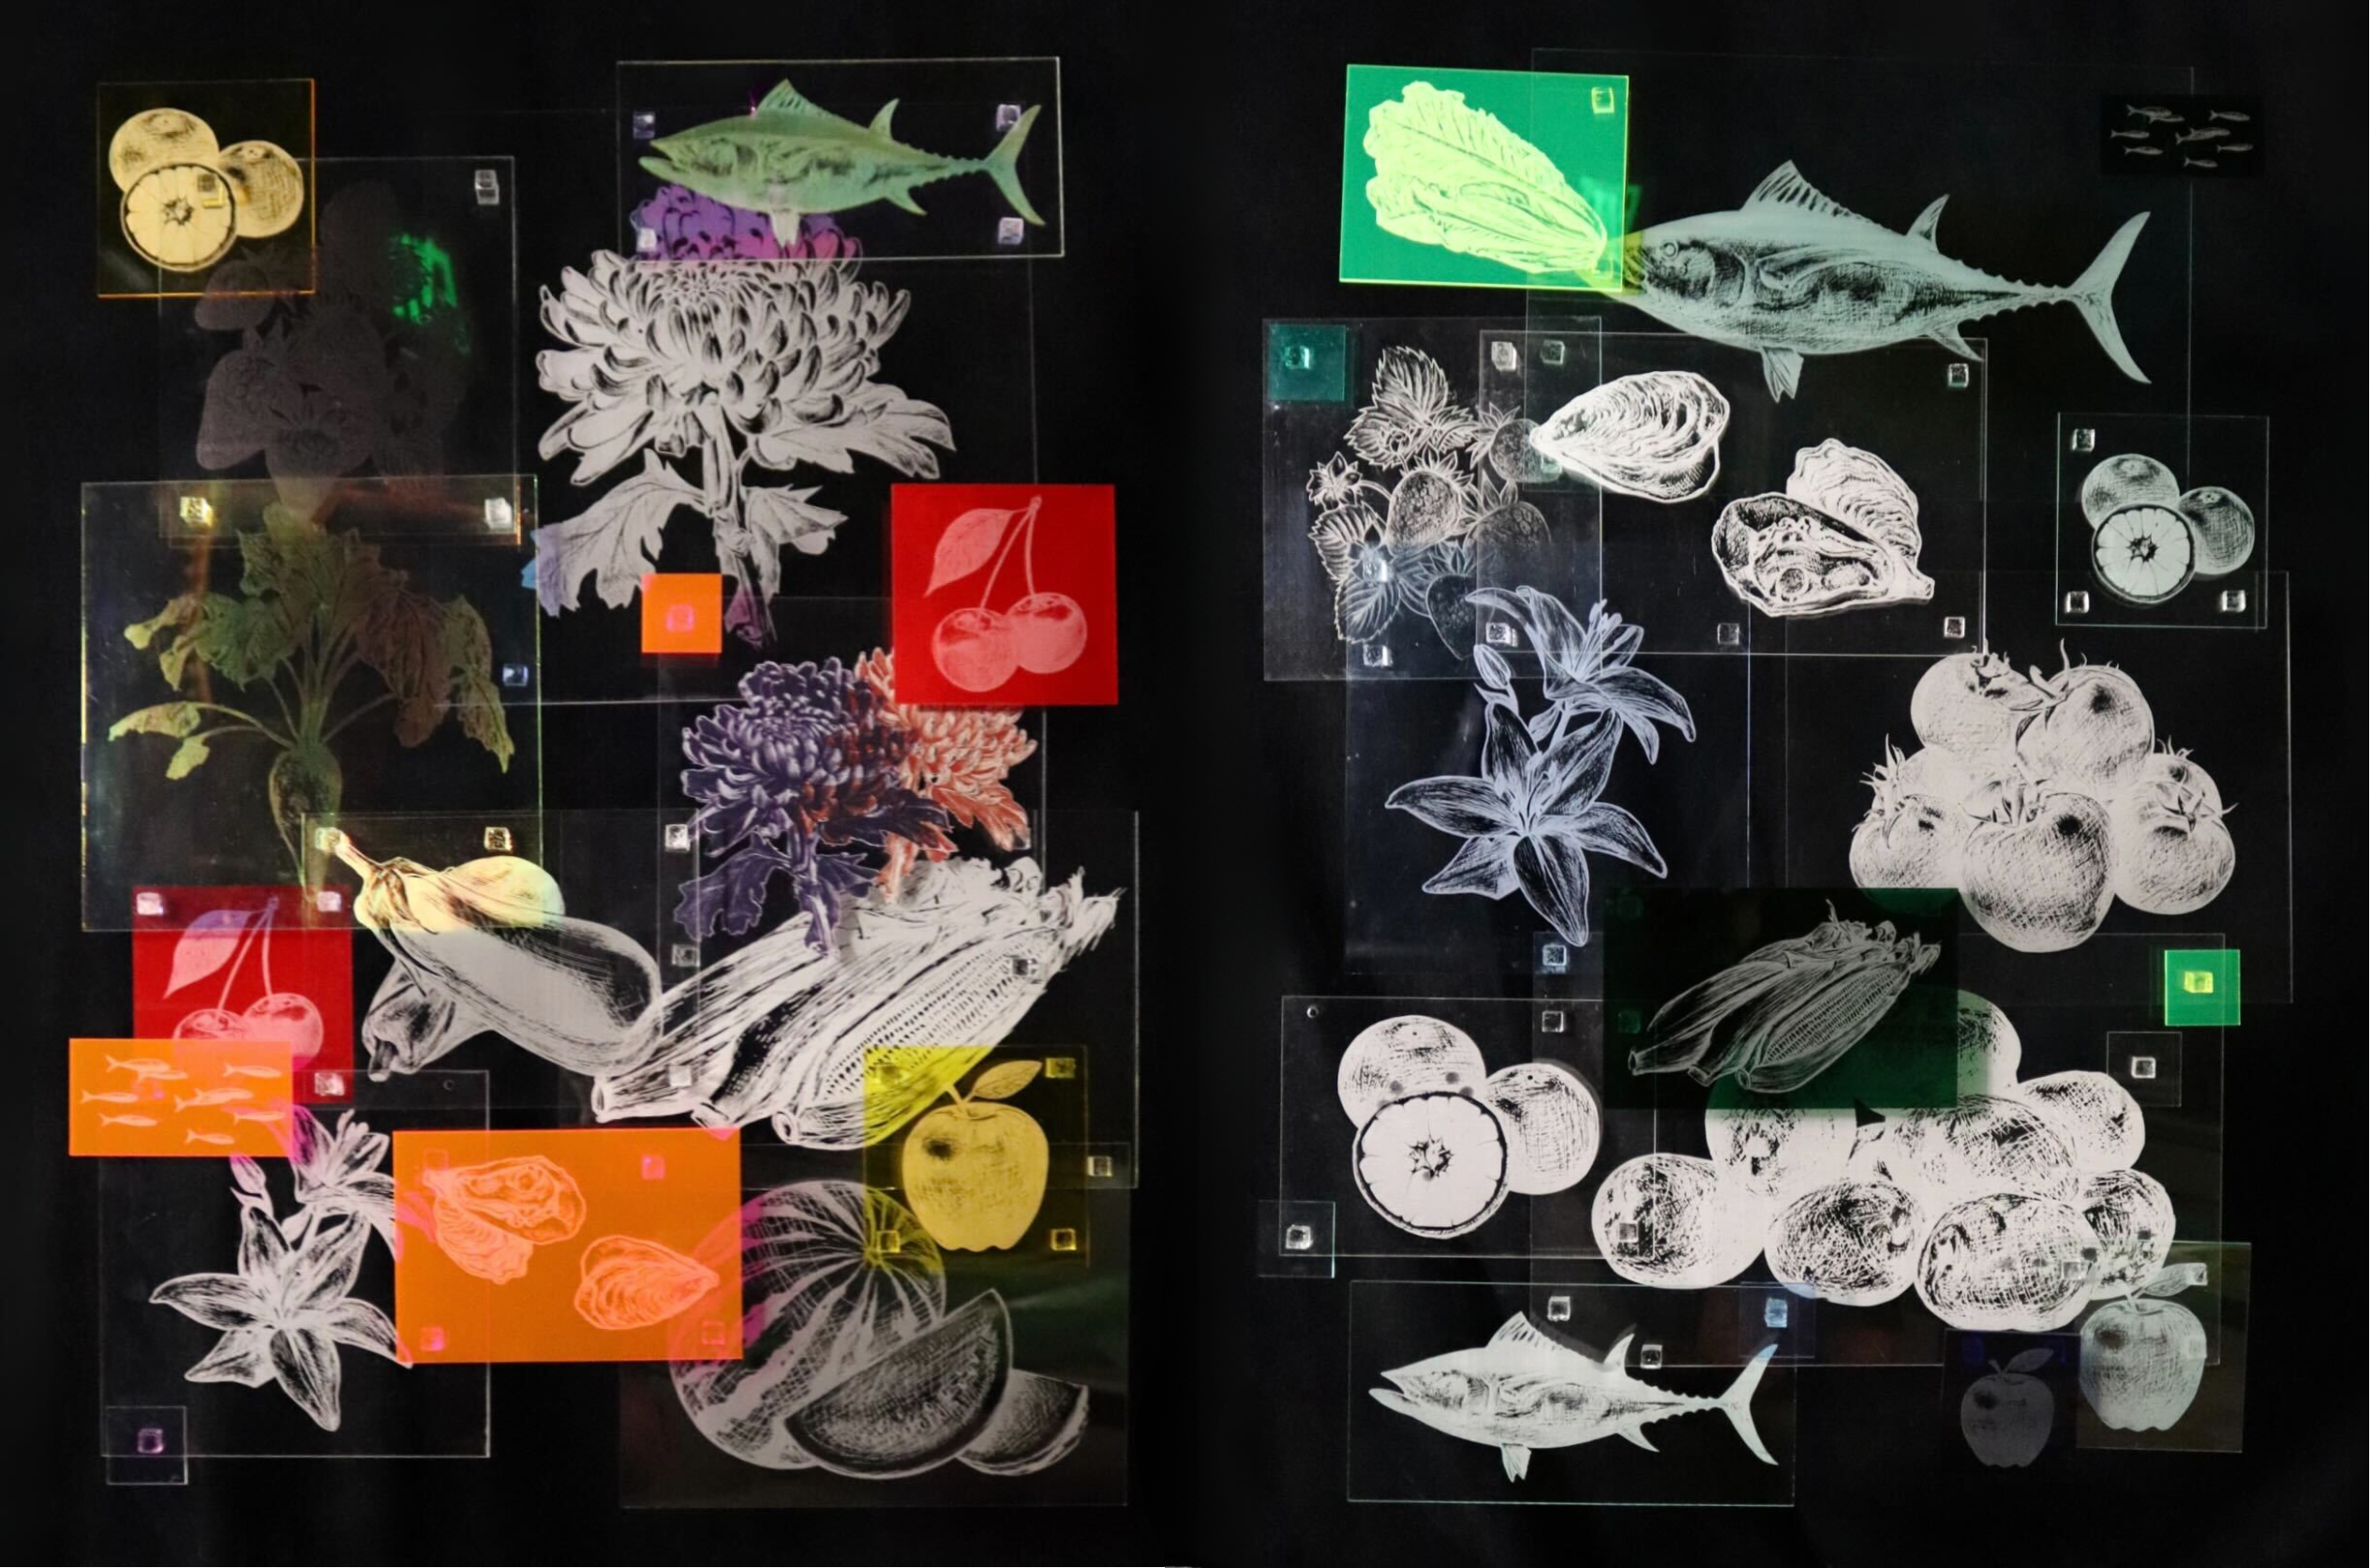 Print Garden by Kanon Shambora. The artwork features several acrylic plates with laser cut drawings of fruits, vegetables, flowers and fish cultivated and caught by Japanese American agricultural workers prior to World War Two incarceration.